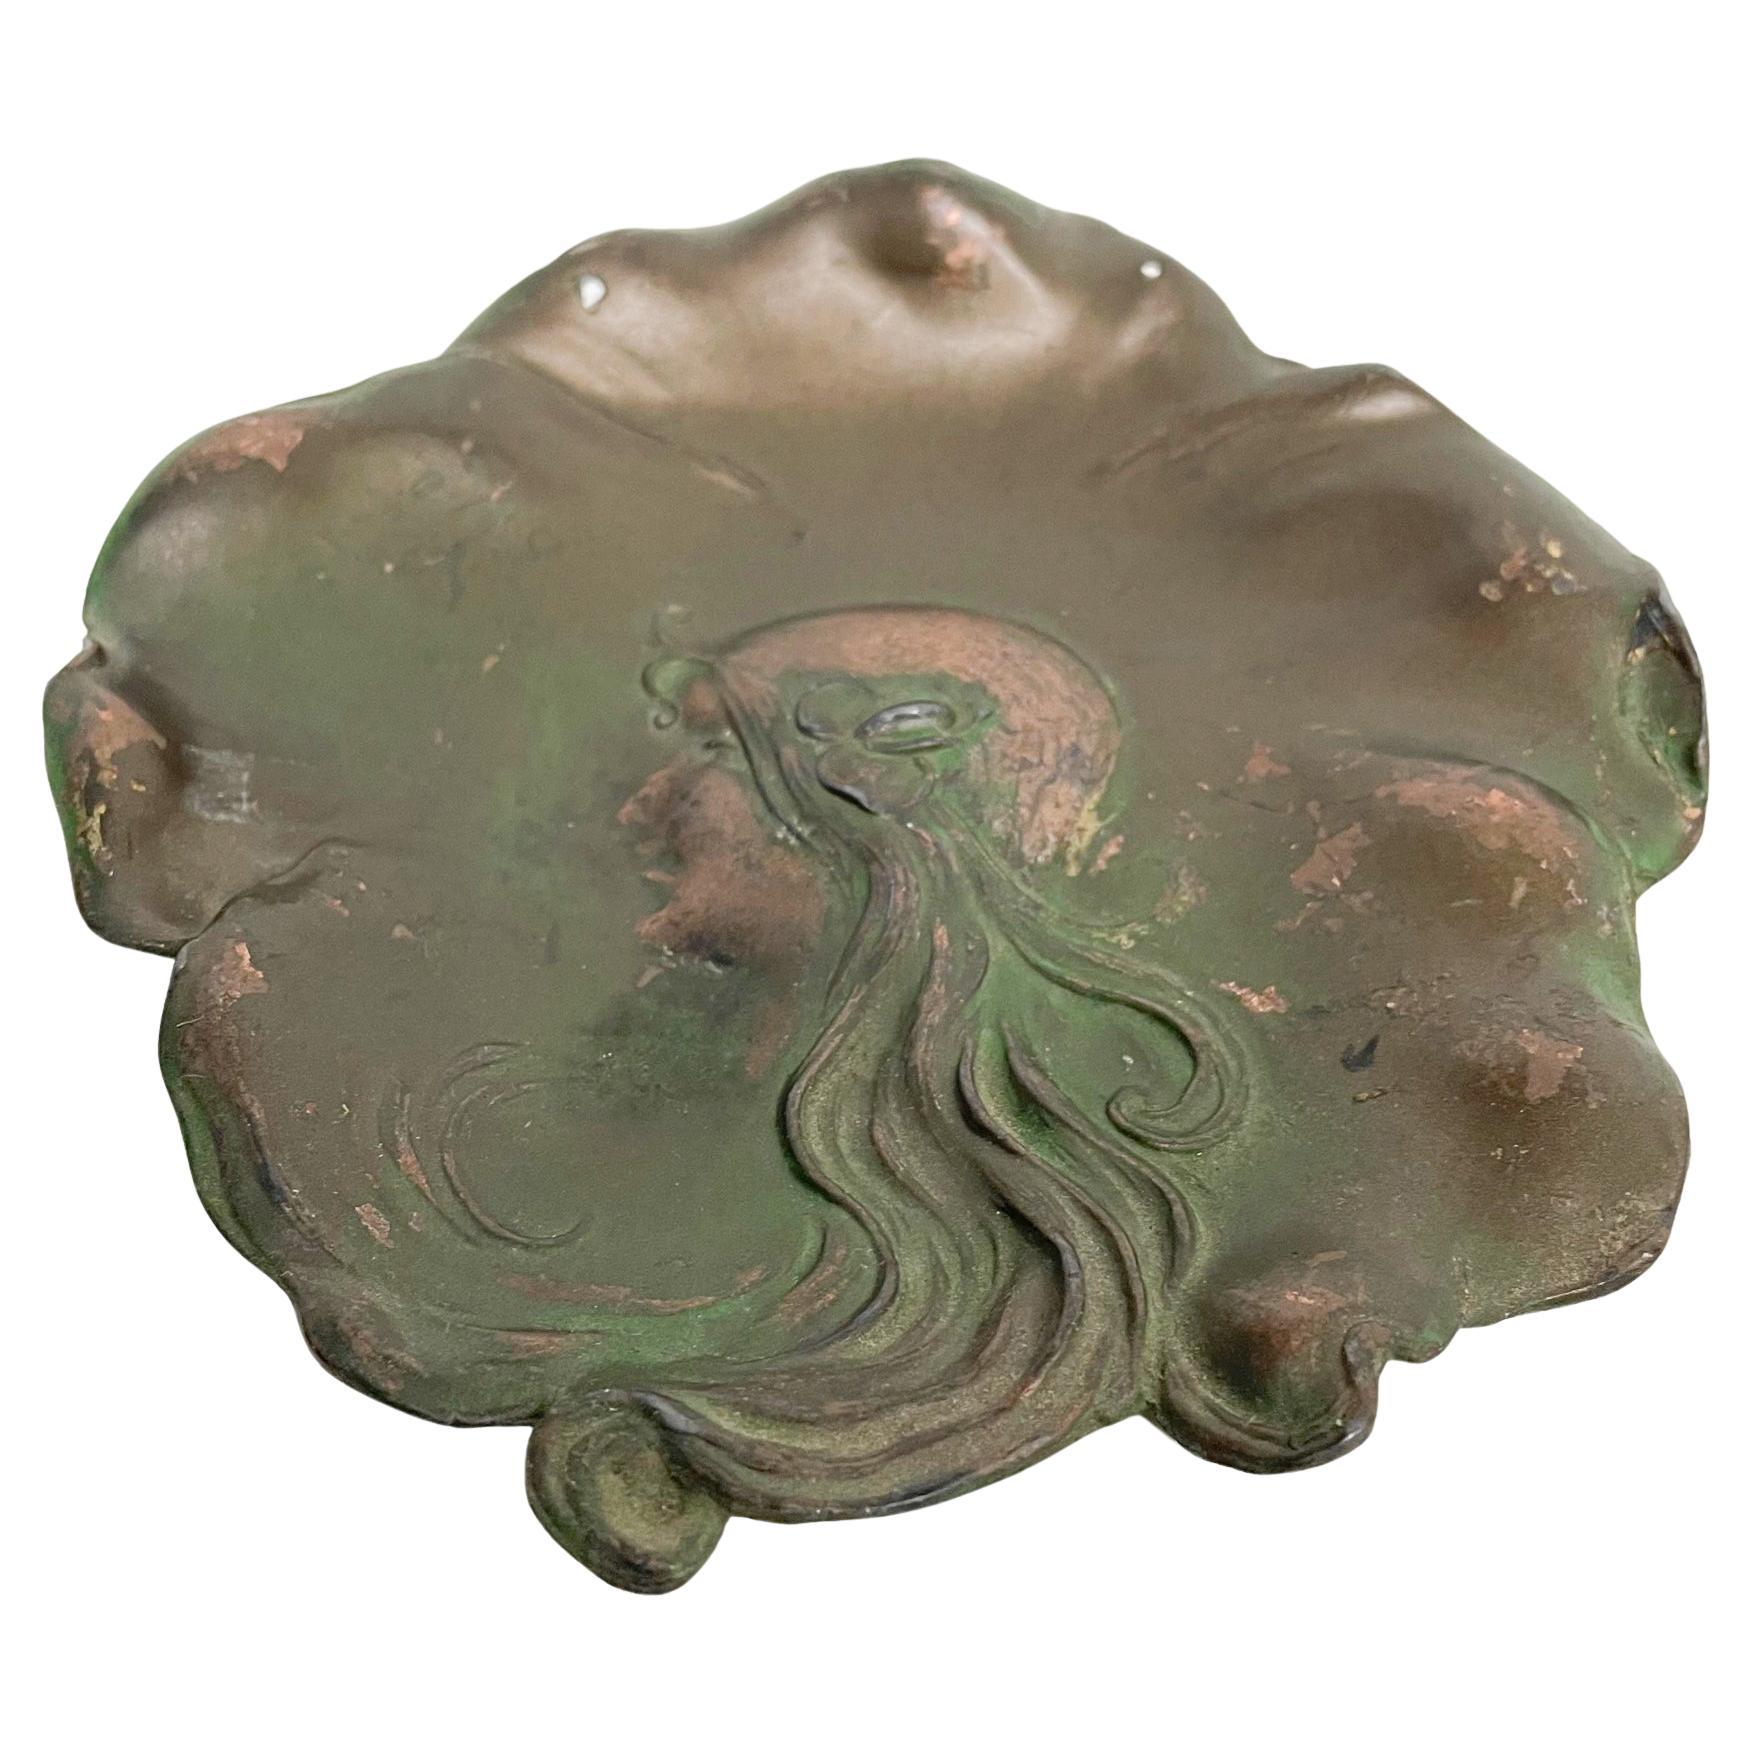 Art Nouveau Deco Fair Maiden Sculptural Leaf Dish - pretty face and flowing hair.
Signed and Dated April 4, 1906
5 diameter x .5
Original Unrestored Fair Vintage Condition - 2 small holes at top.  
Minor losses and minor fading.
See images